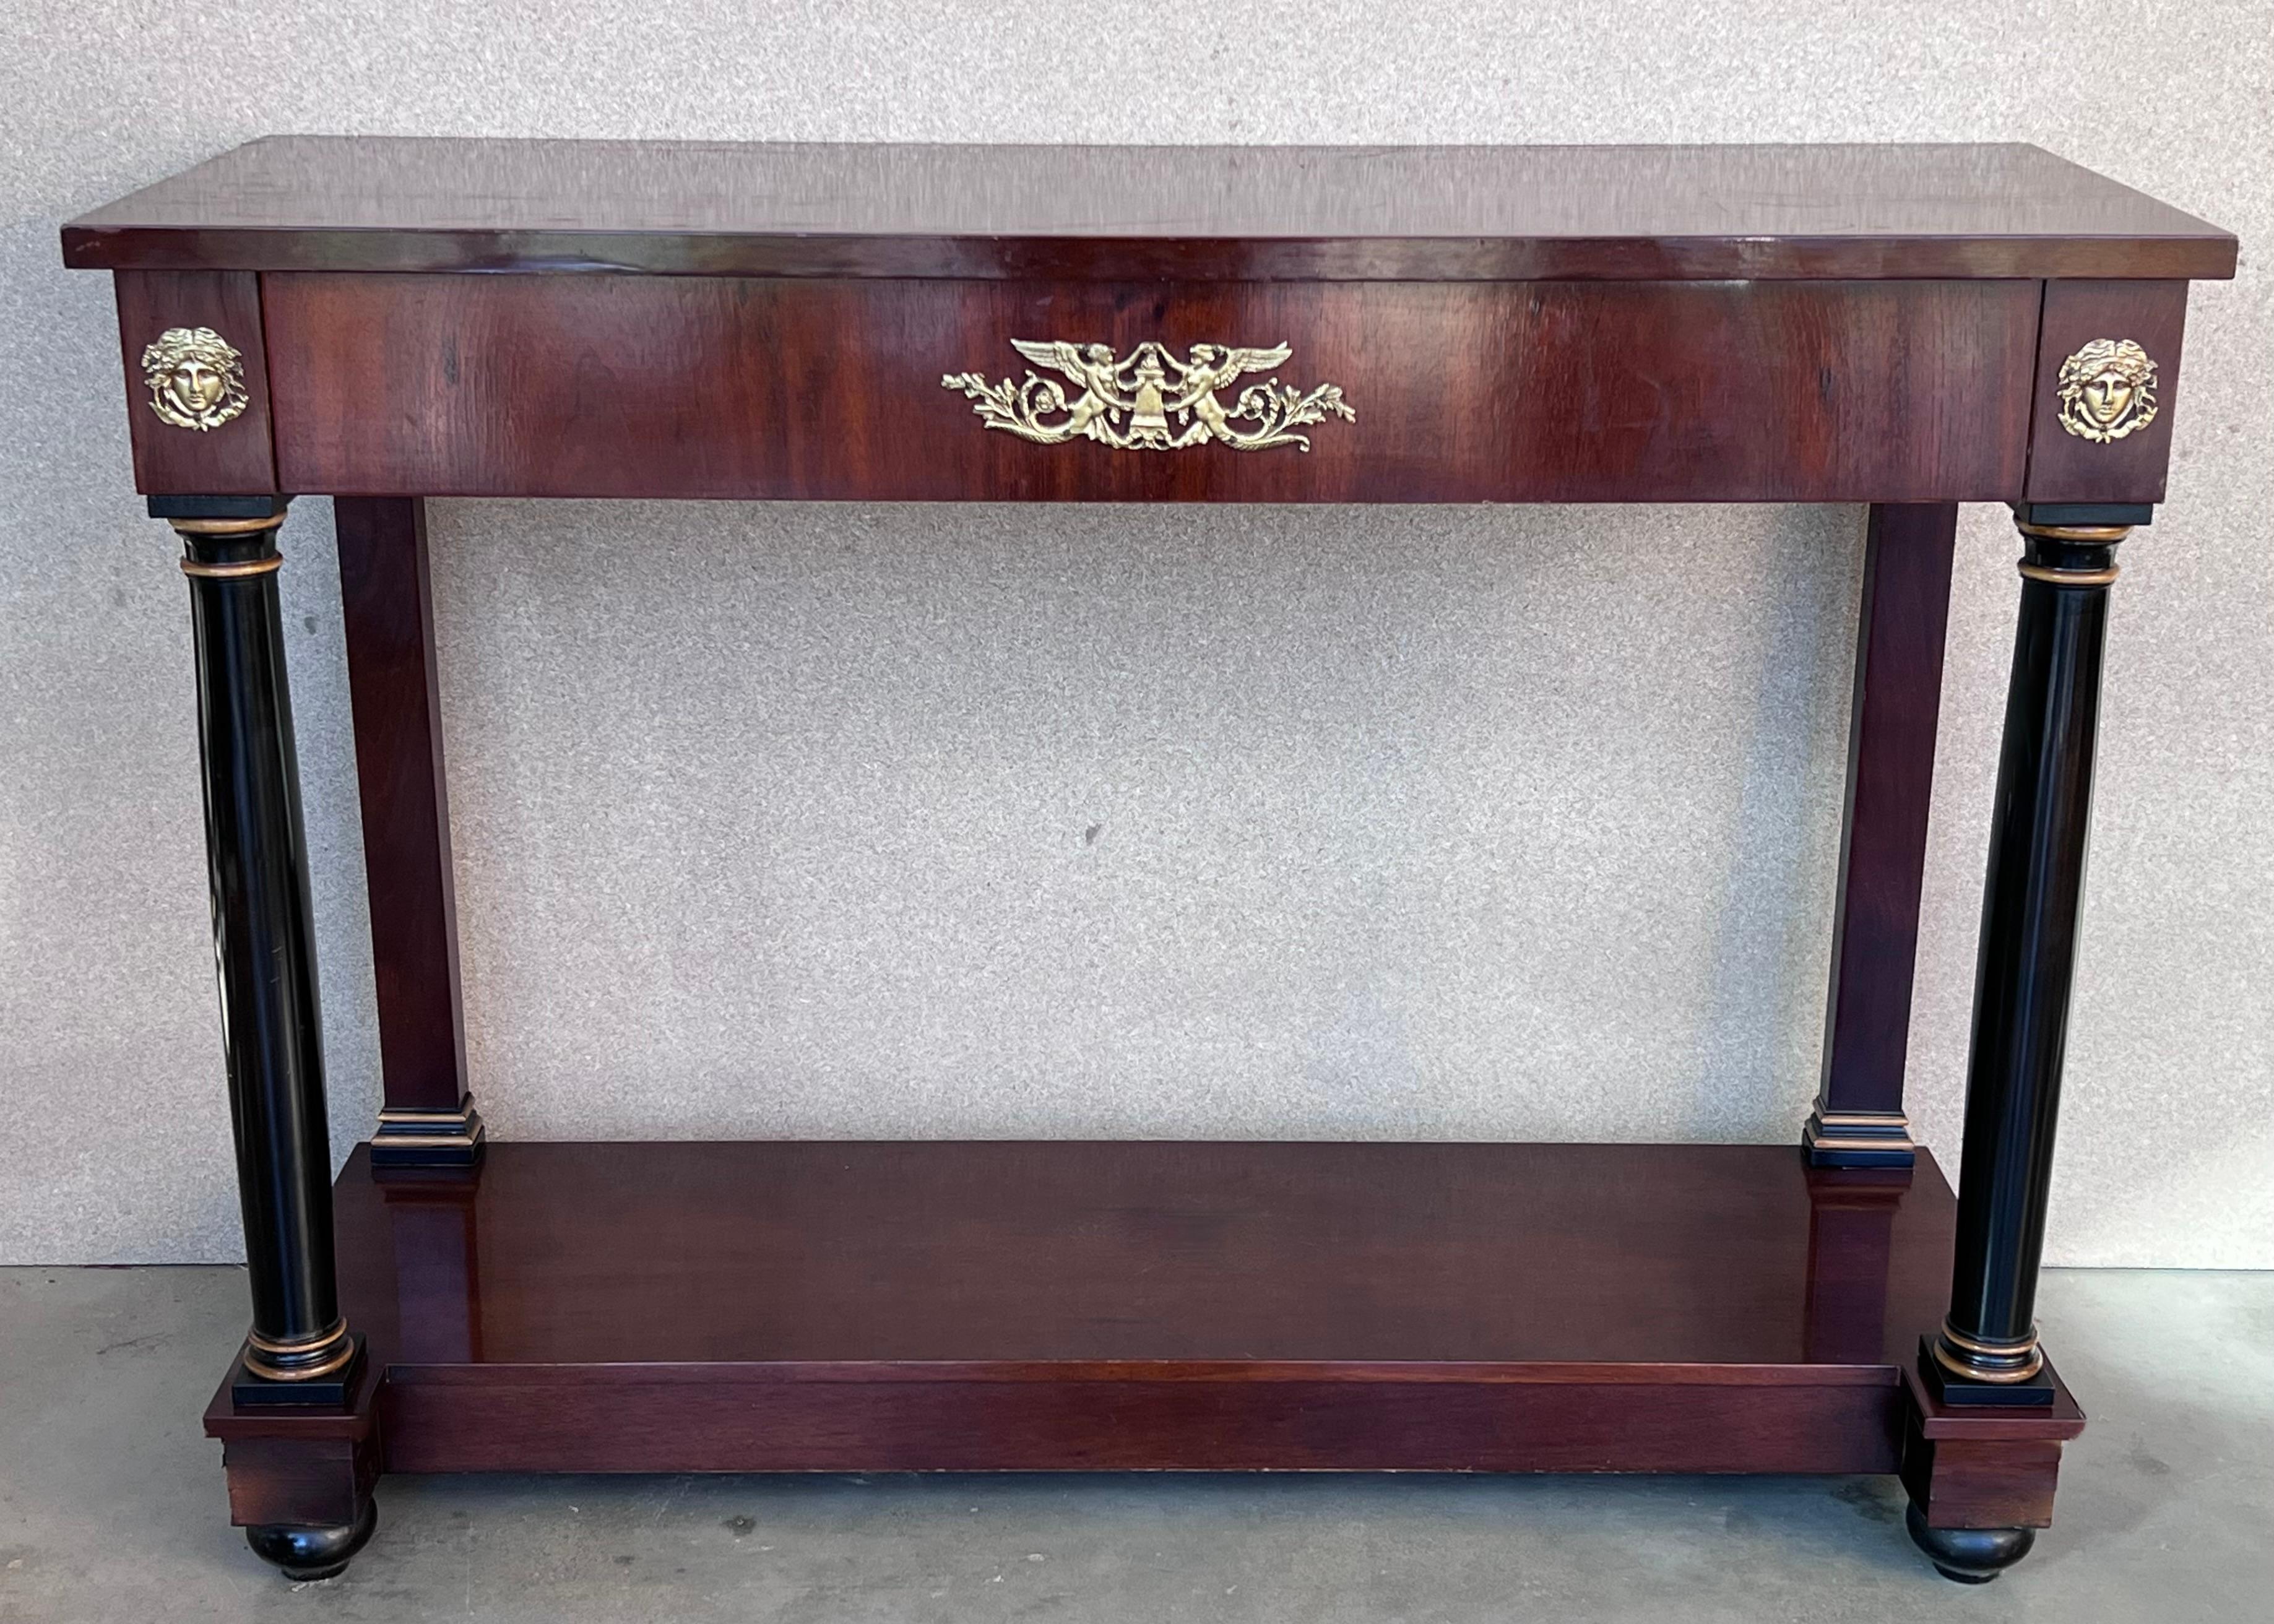 Handsome 19th century Empire style console in walnut adorned with ebonized column legs and rectangular base, Vienna, circa 1840.